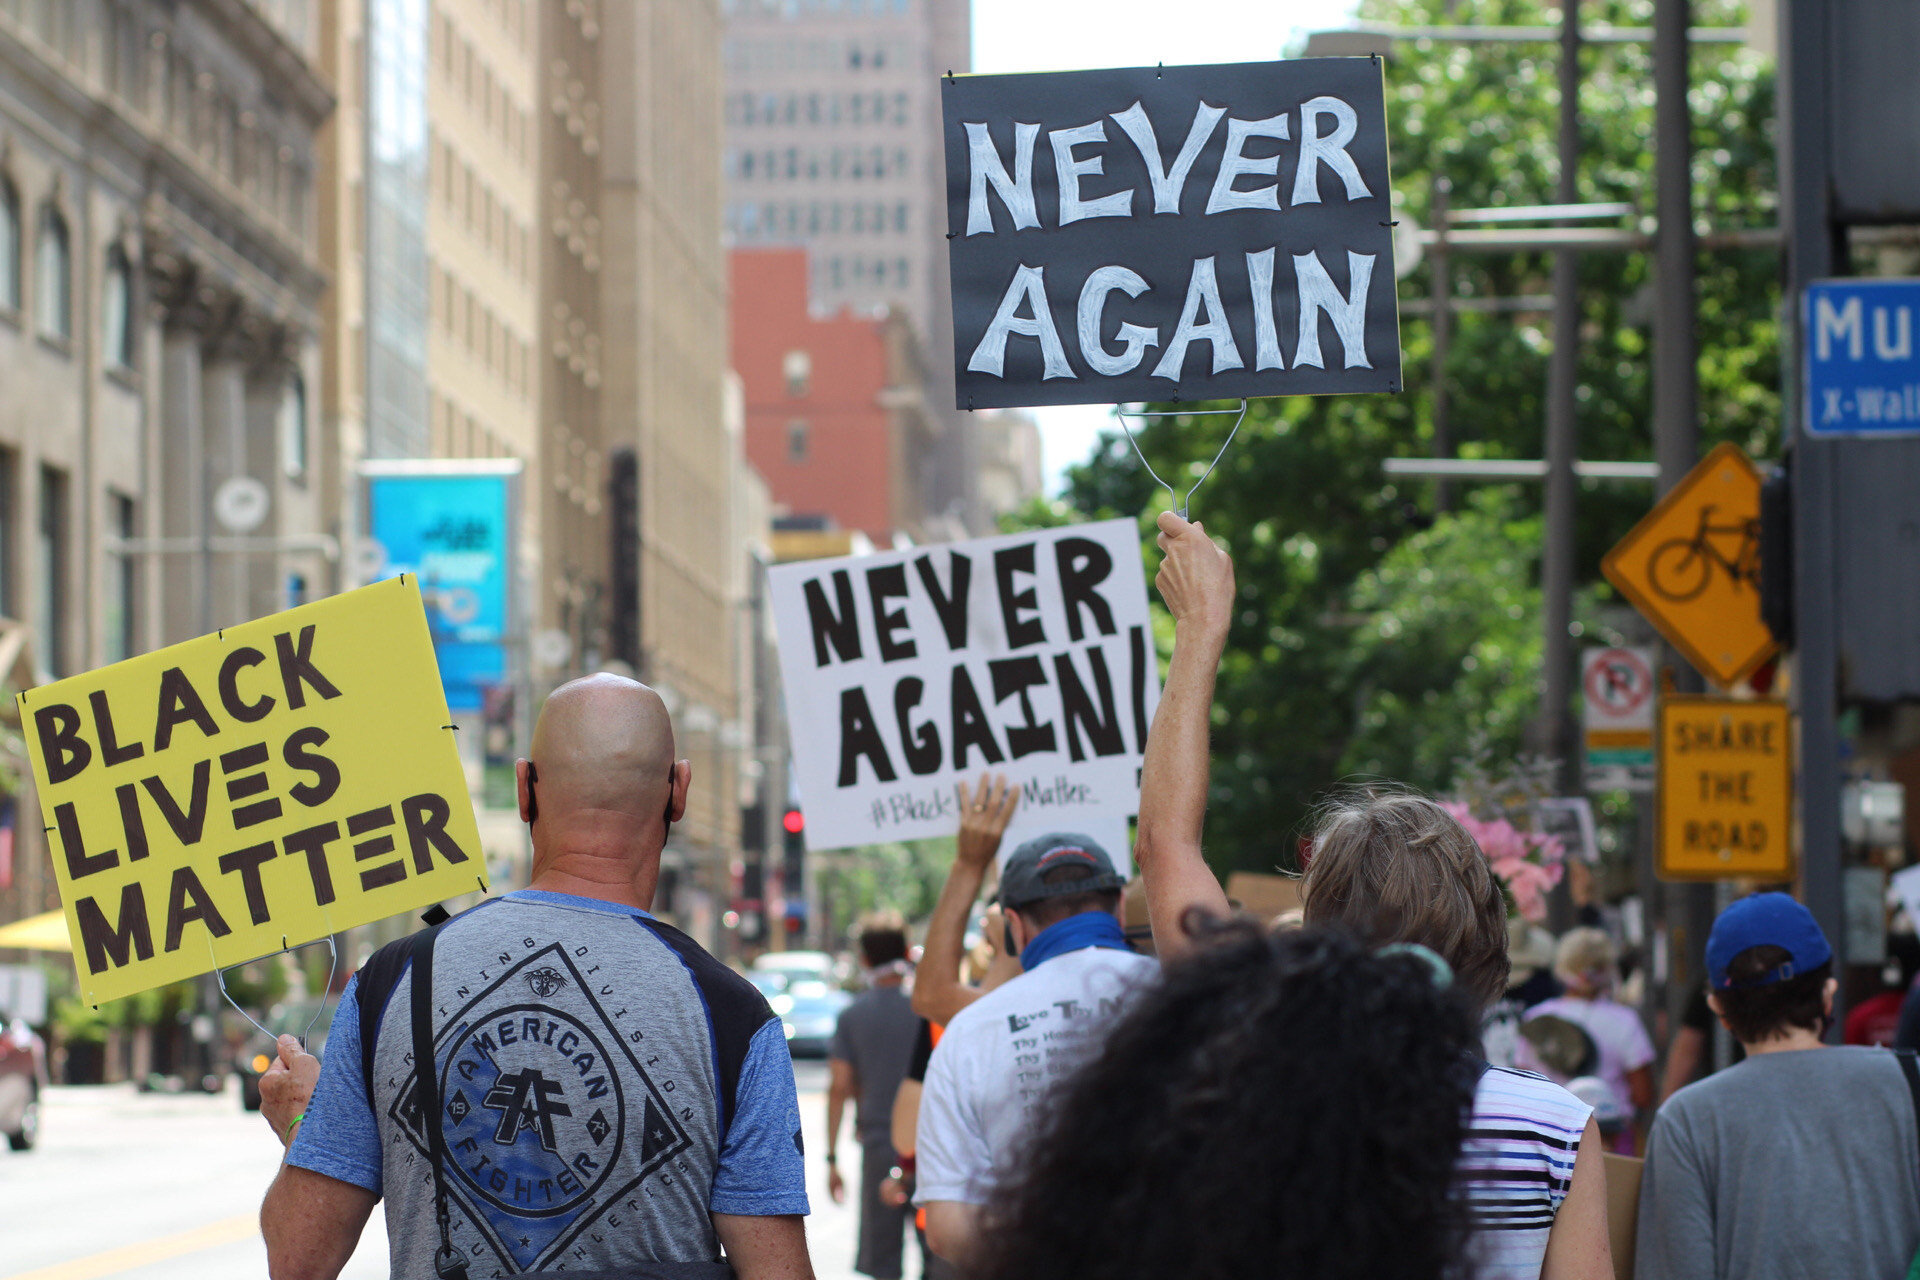 Never Again Pilgrimage through downtown Dallas on Saturday, June 20th. (Photo by Janell Bethea.)